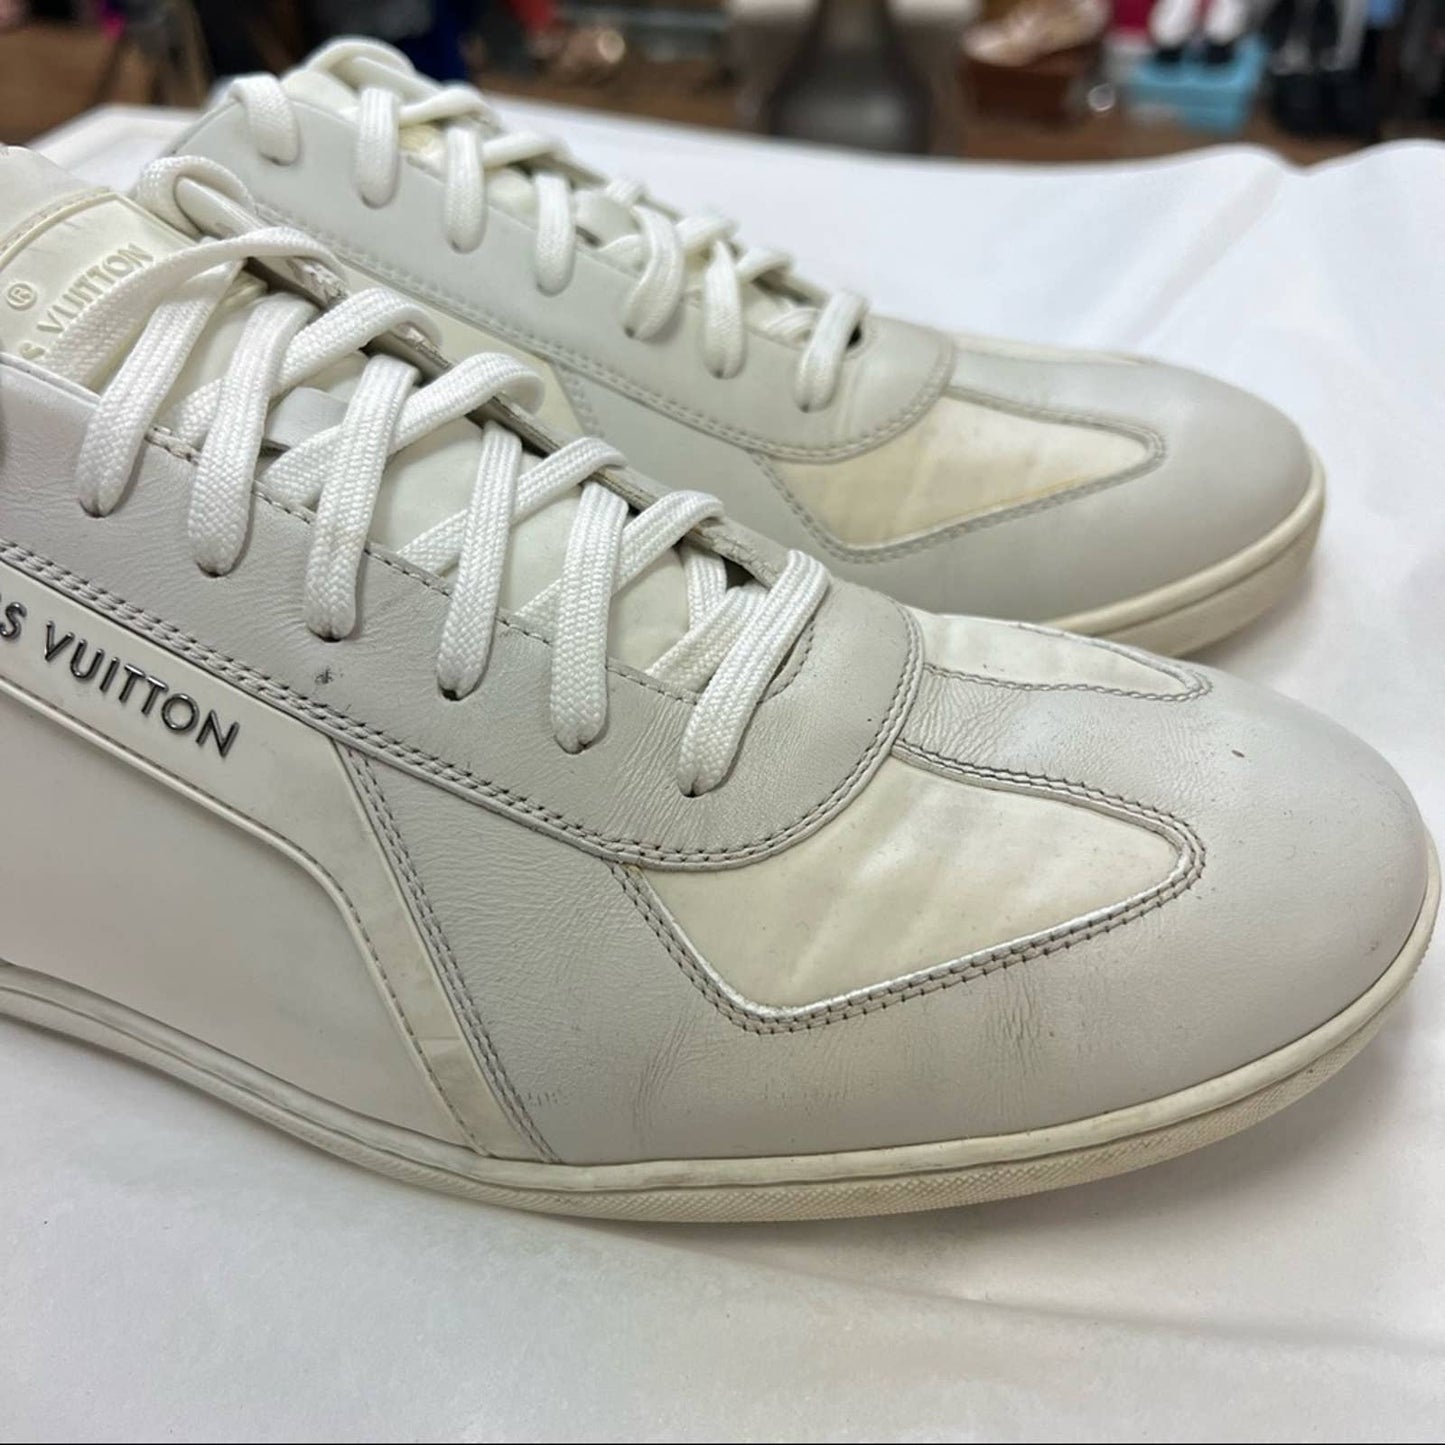 LOUIS VUITTON Men's White Leather Trim Lace up Low Top Sneakers 8